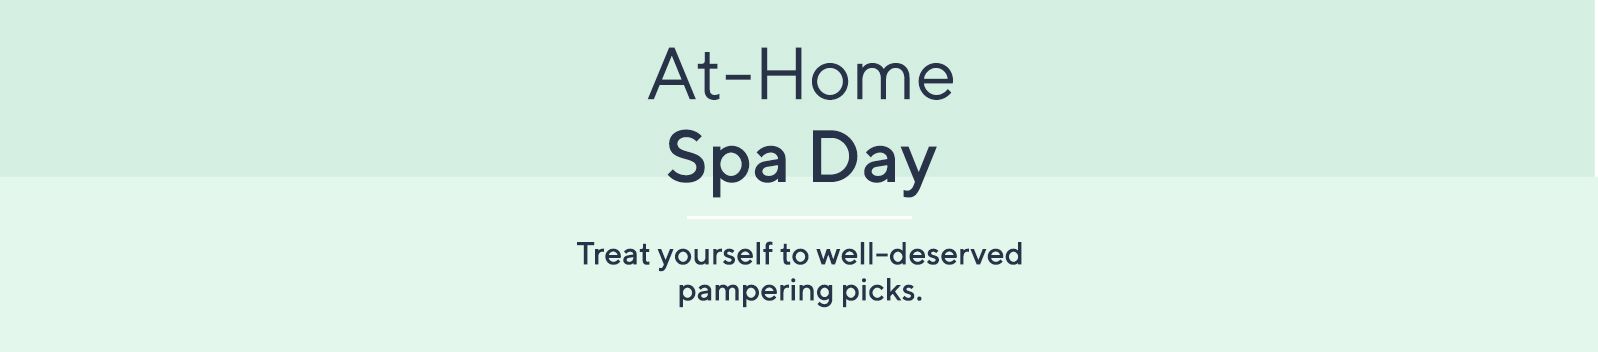 At-Home Spa Day Treat yourself to well-deserved pampering picks.